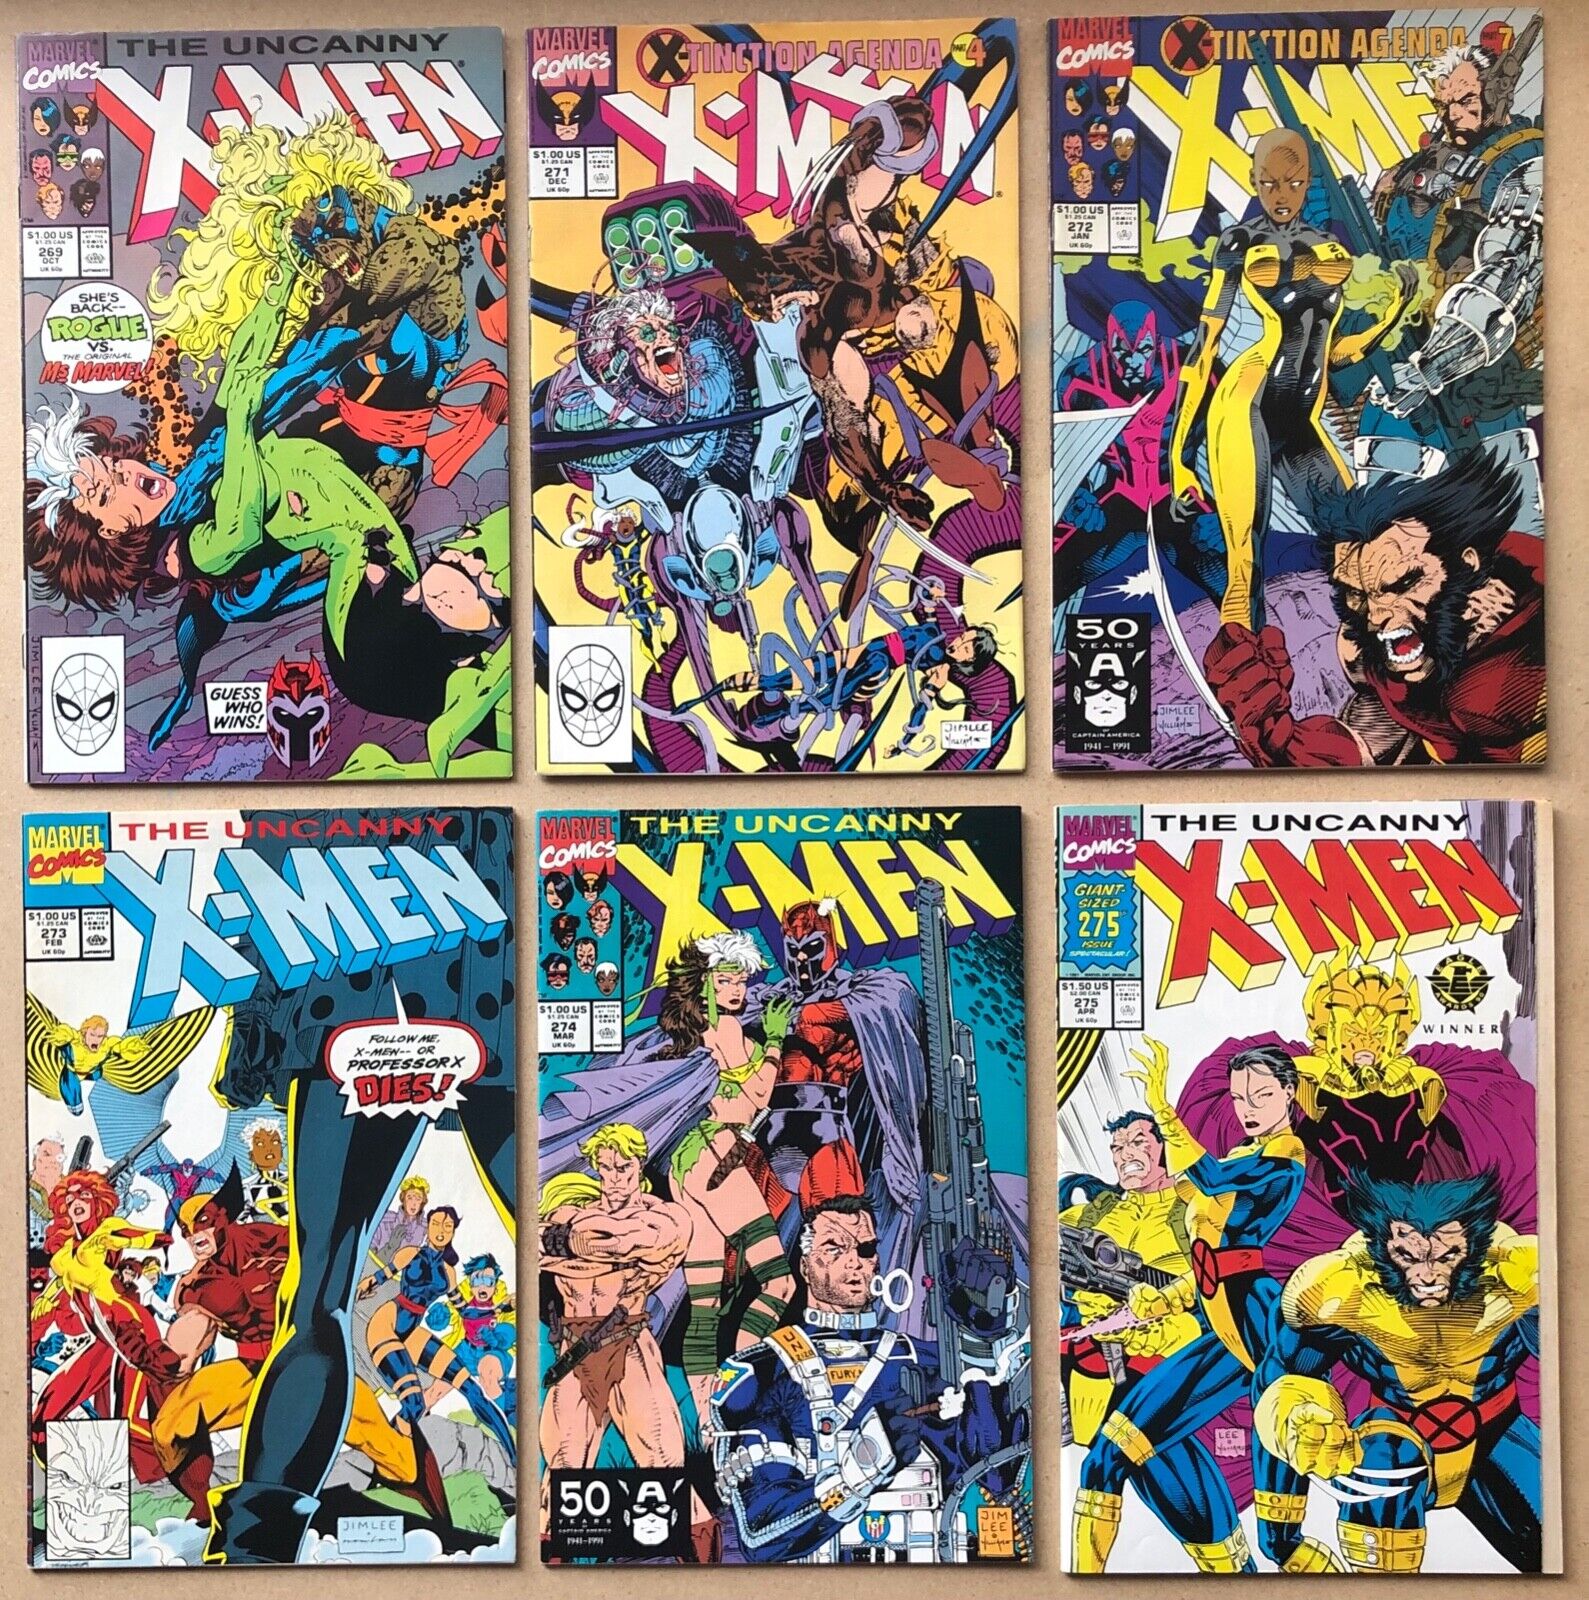 Lot of 25 Uncanny X-Men #251-275 MISSING #266 Annual #14 READERS